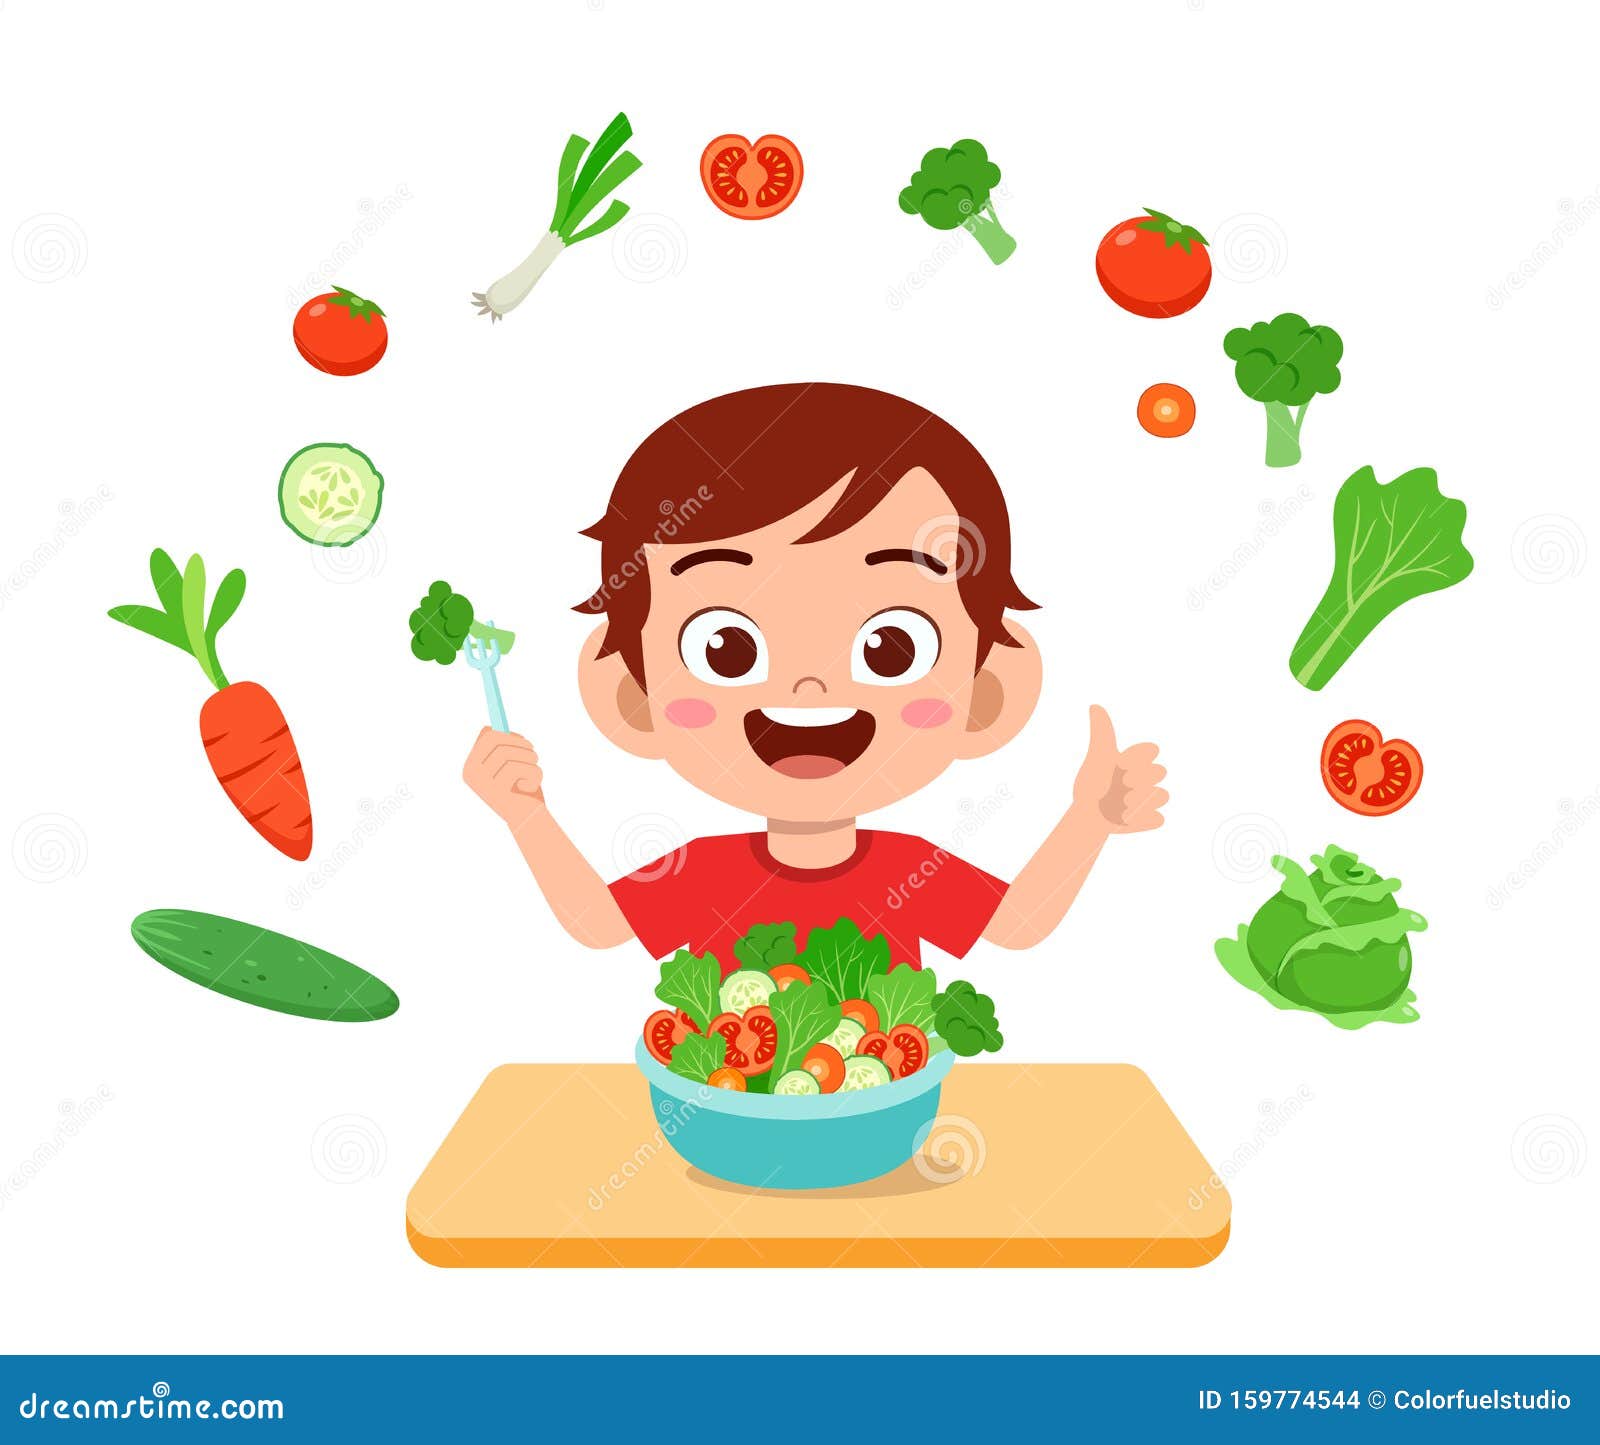 Cute Happy Kid Eat Salad Vegetable Fruits Stock Vector - Illustration of  parenting, child: 159774544